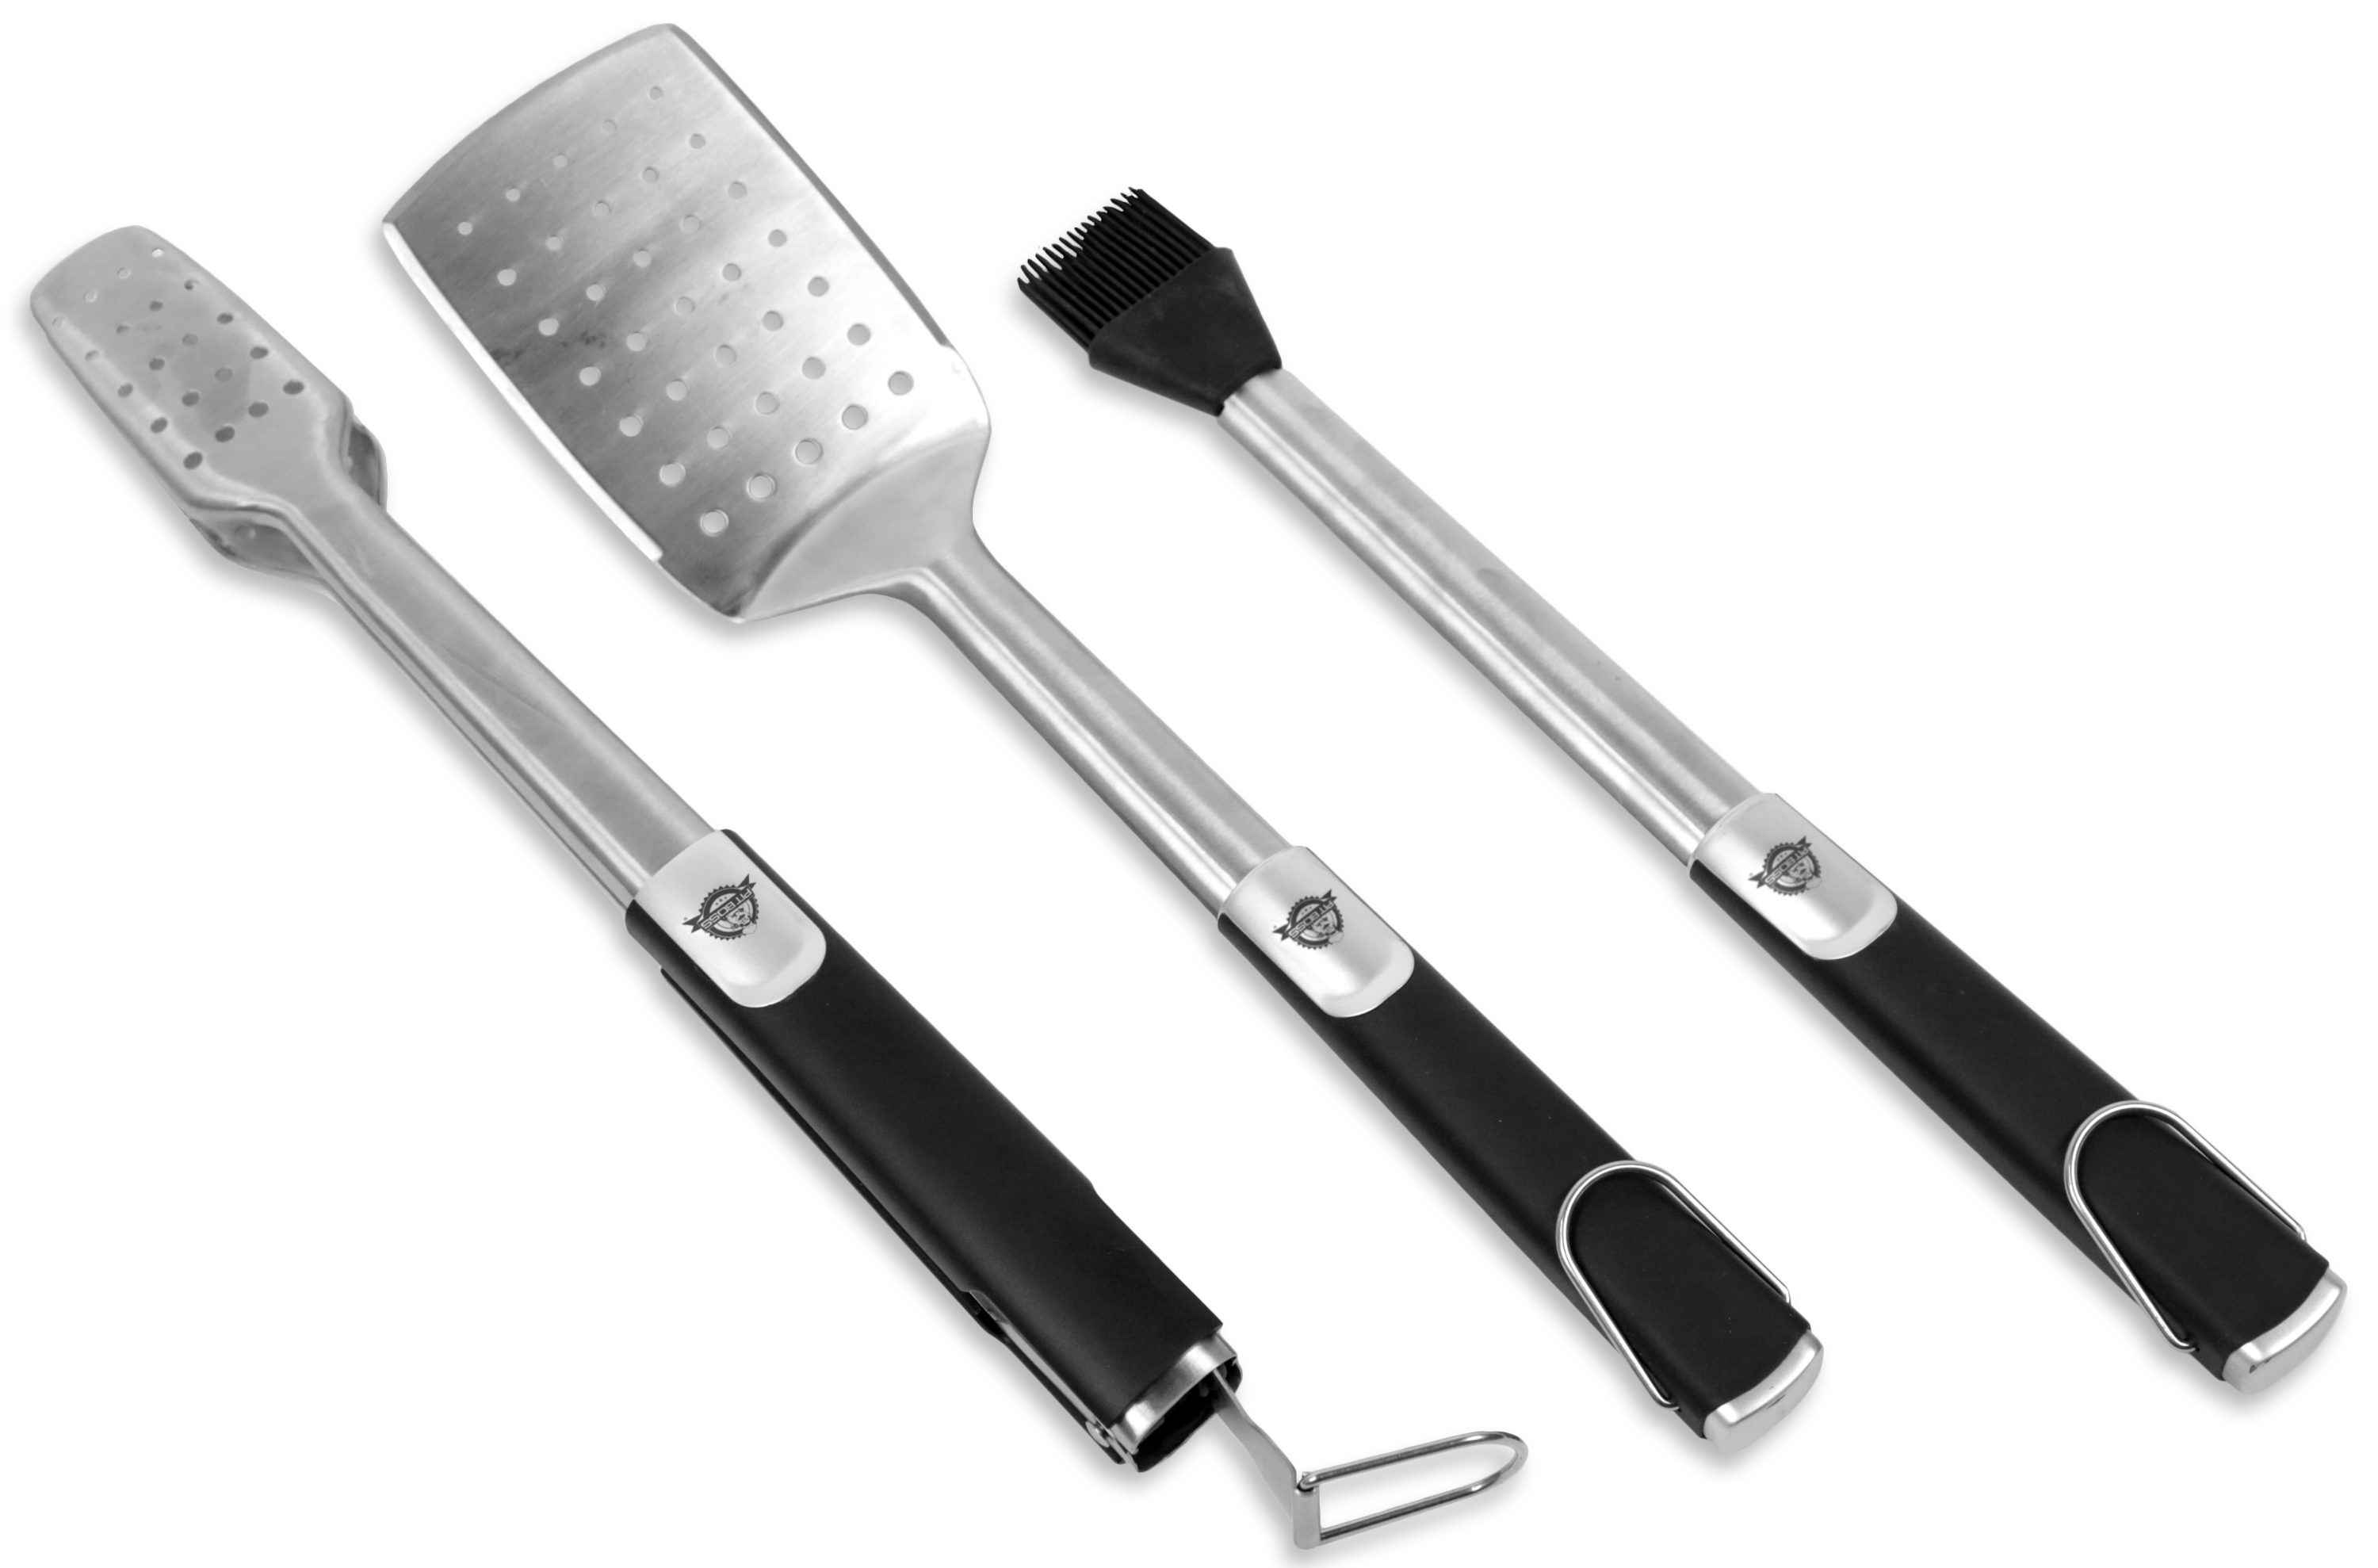 Primecook Stainless Steel and Nylon Kitchen Tong